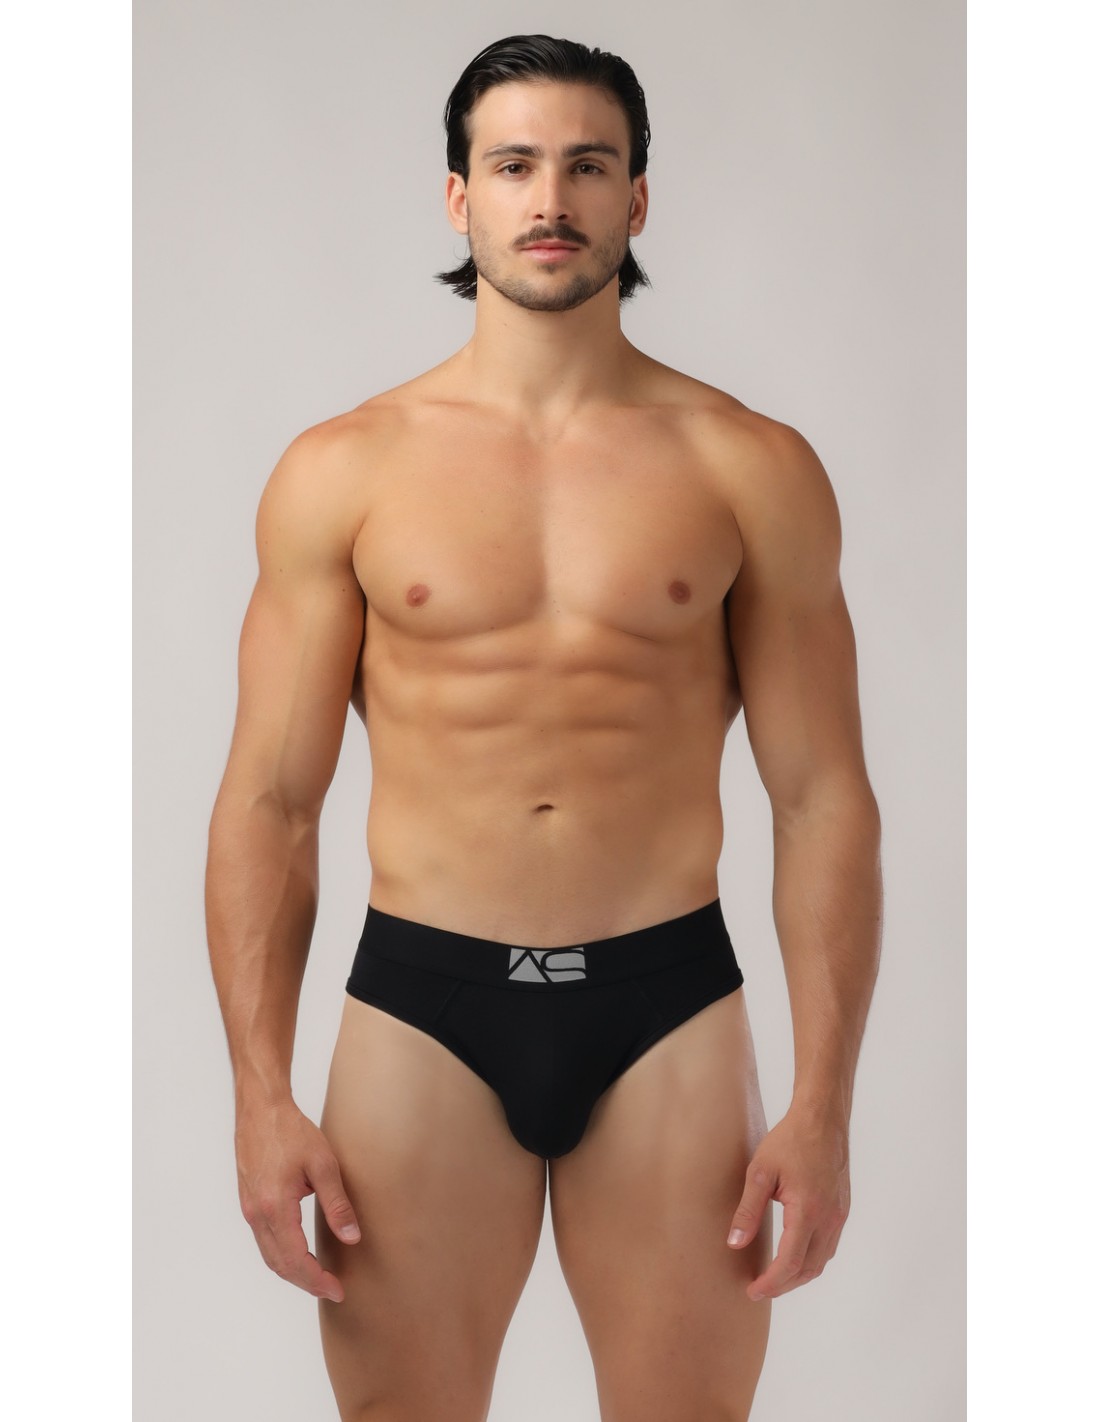 Top quality, high-end underwear, elegant and comfortable! The Adam